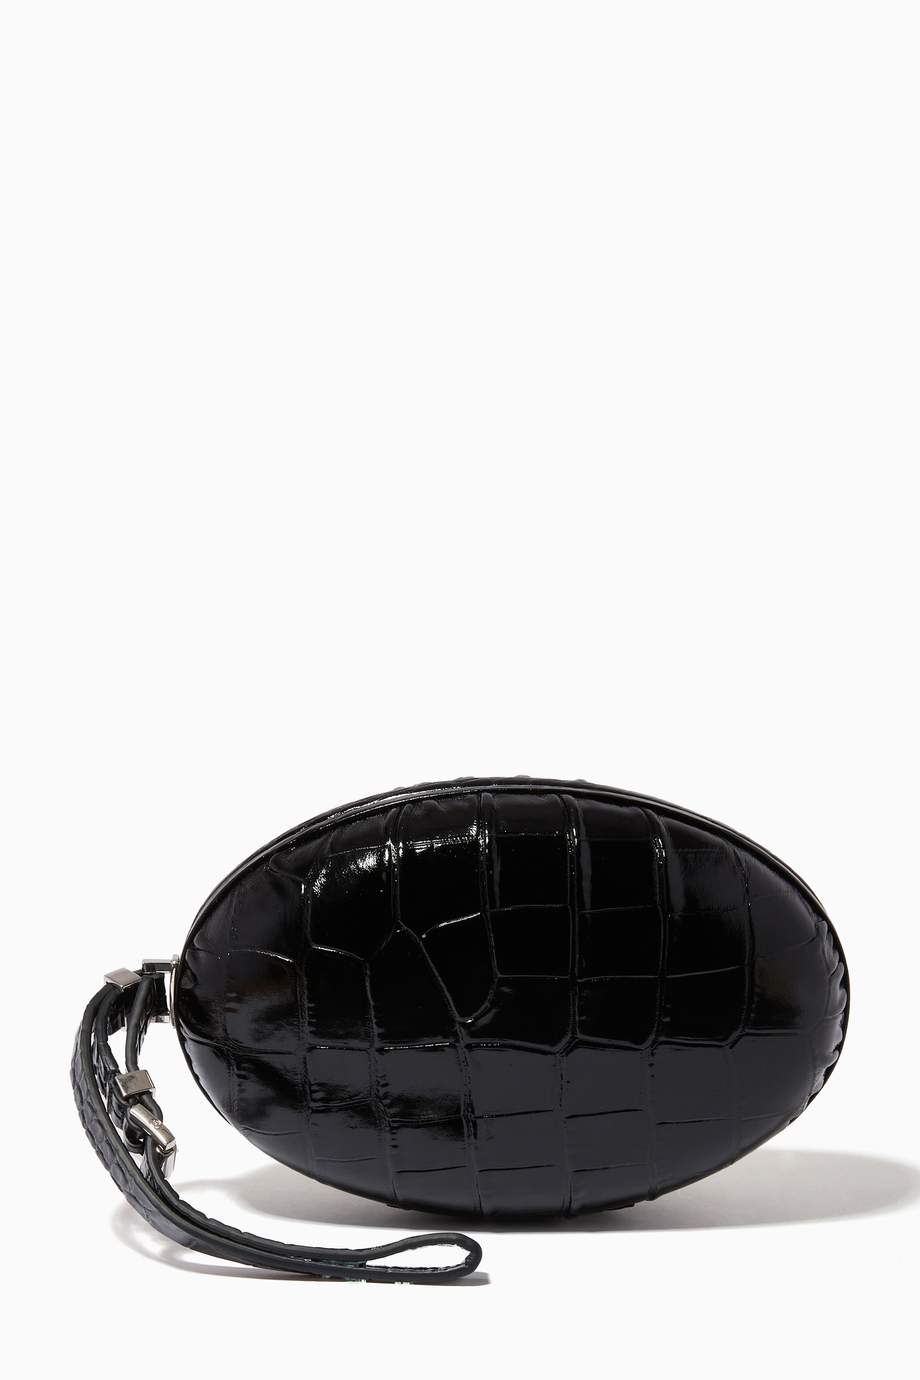 Shop Michael Kors Collection Black Gramercy Minaudière Wristlet in Croc-embossed Leather for Women | Ounass UAE